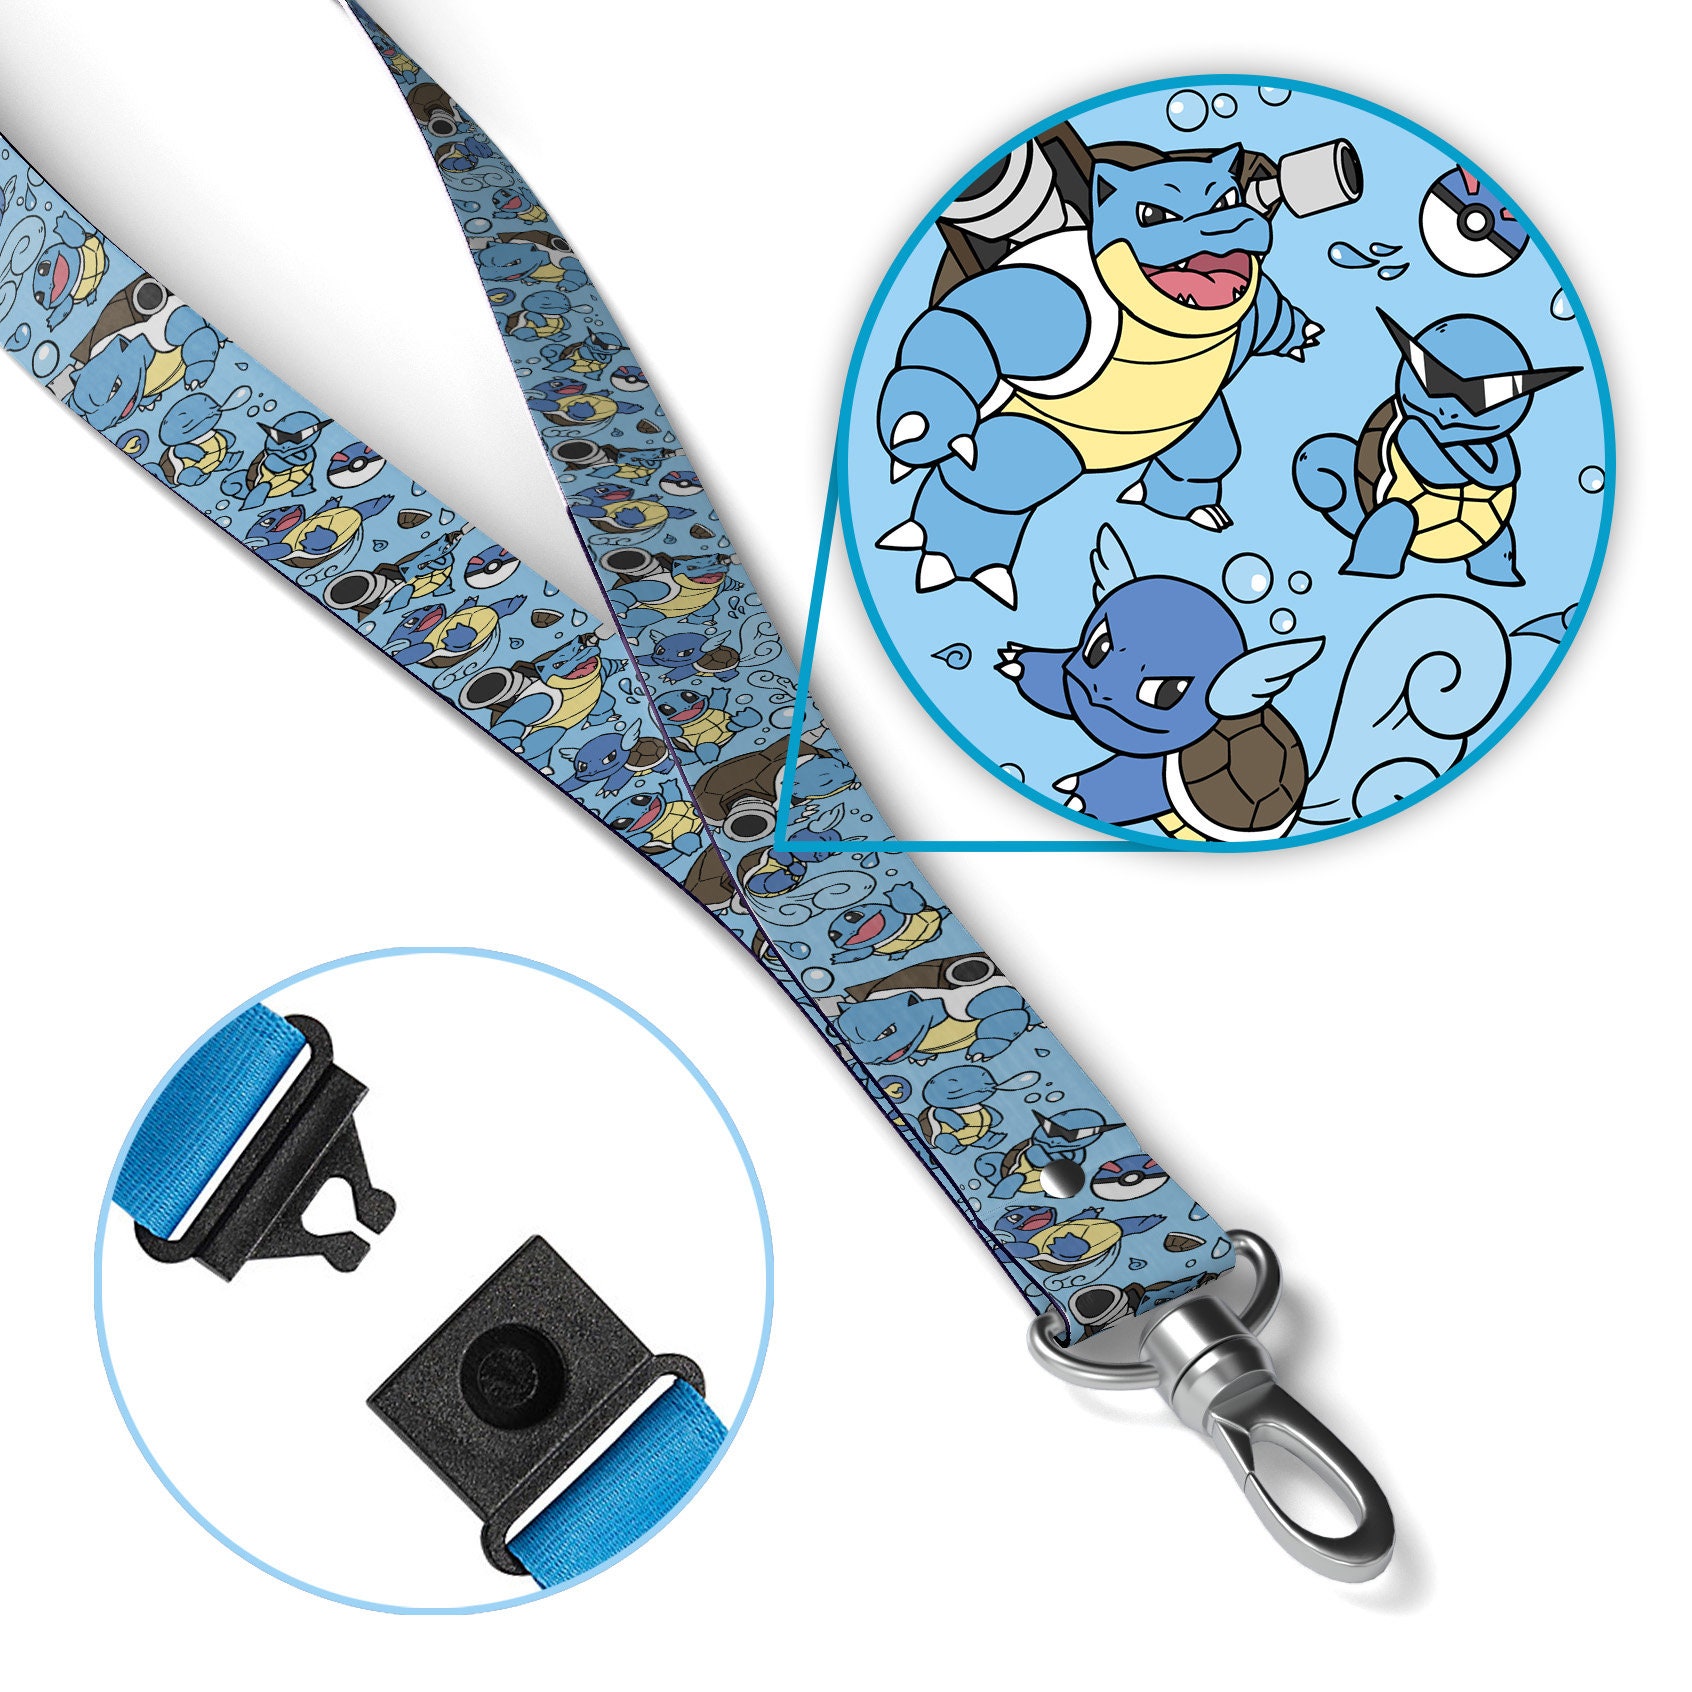 Blastoise Wartortle Squirtle XL Breakaway Lanyard! Perfect for A Gift, Present, Holiday, Birthday! Japanese Anime